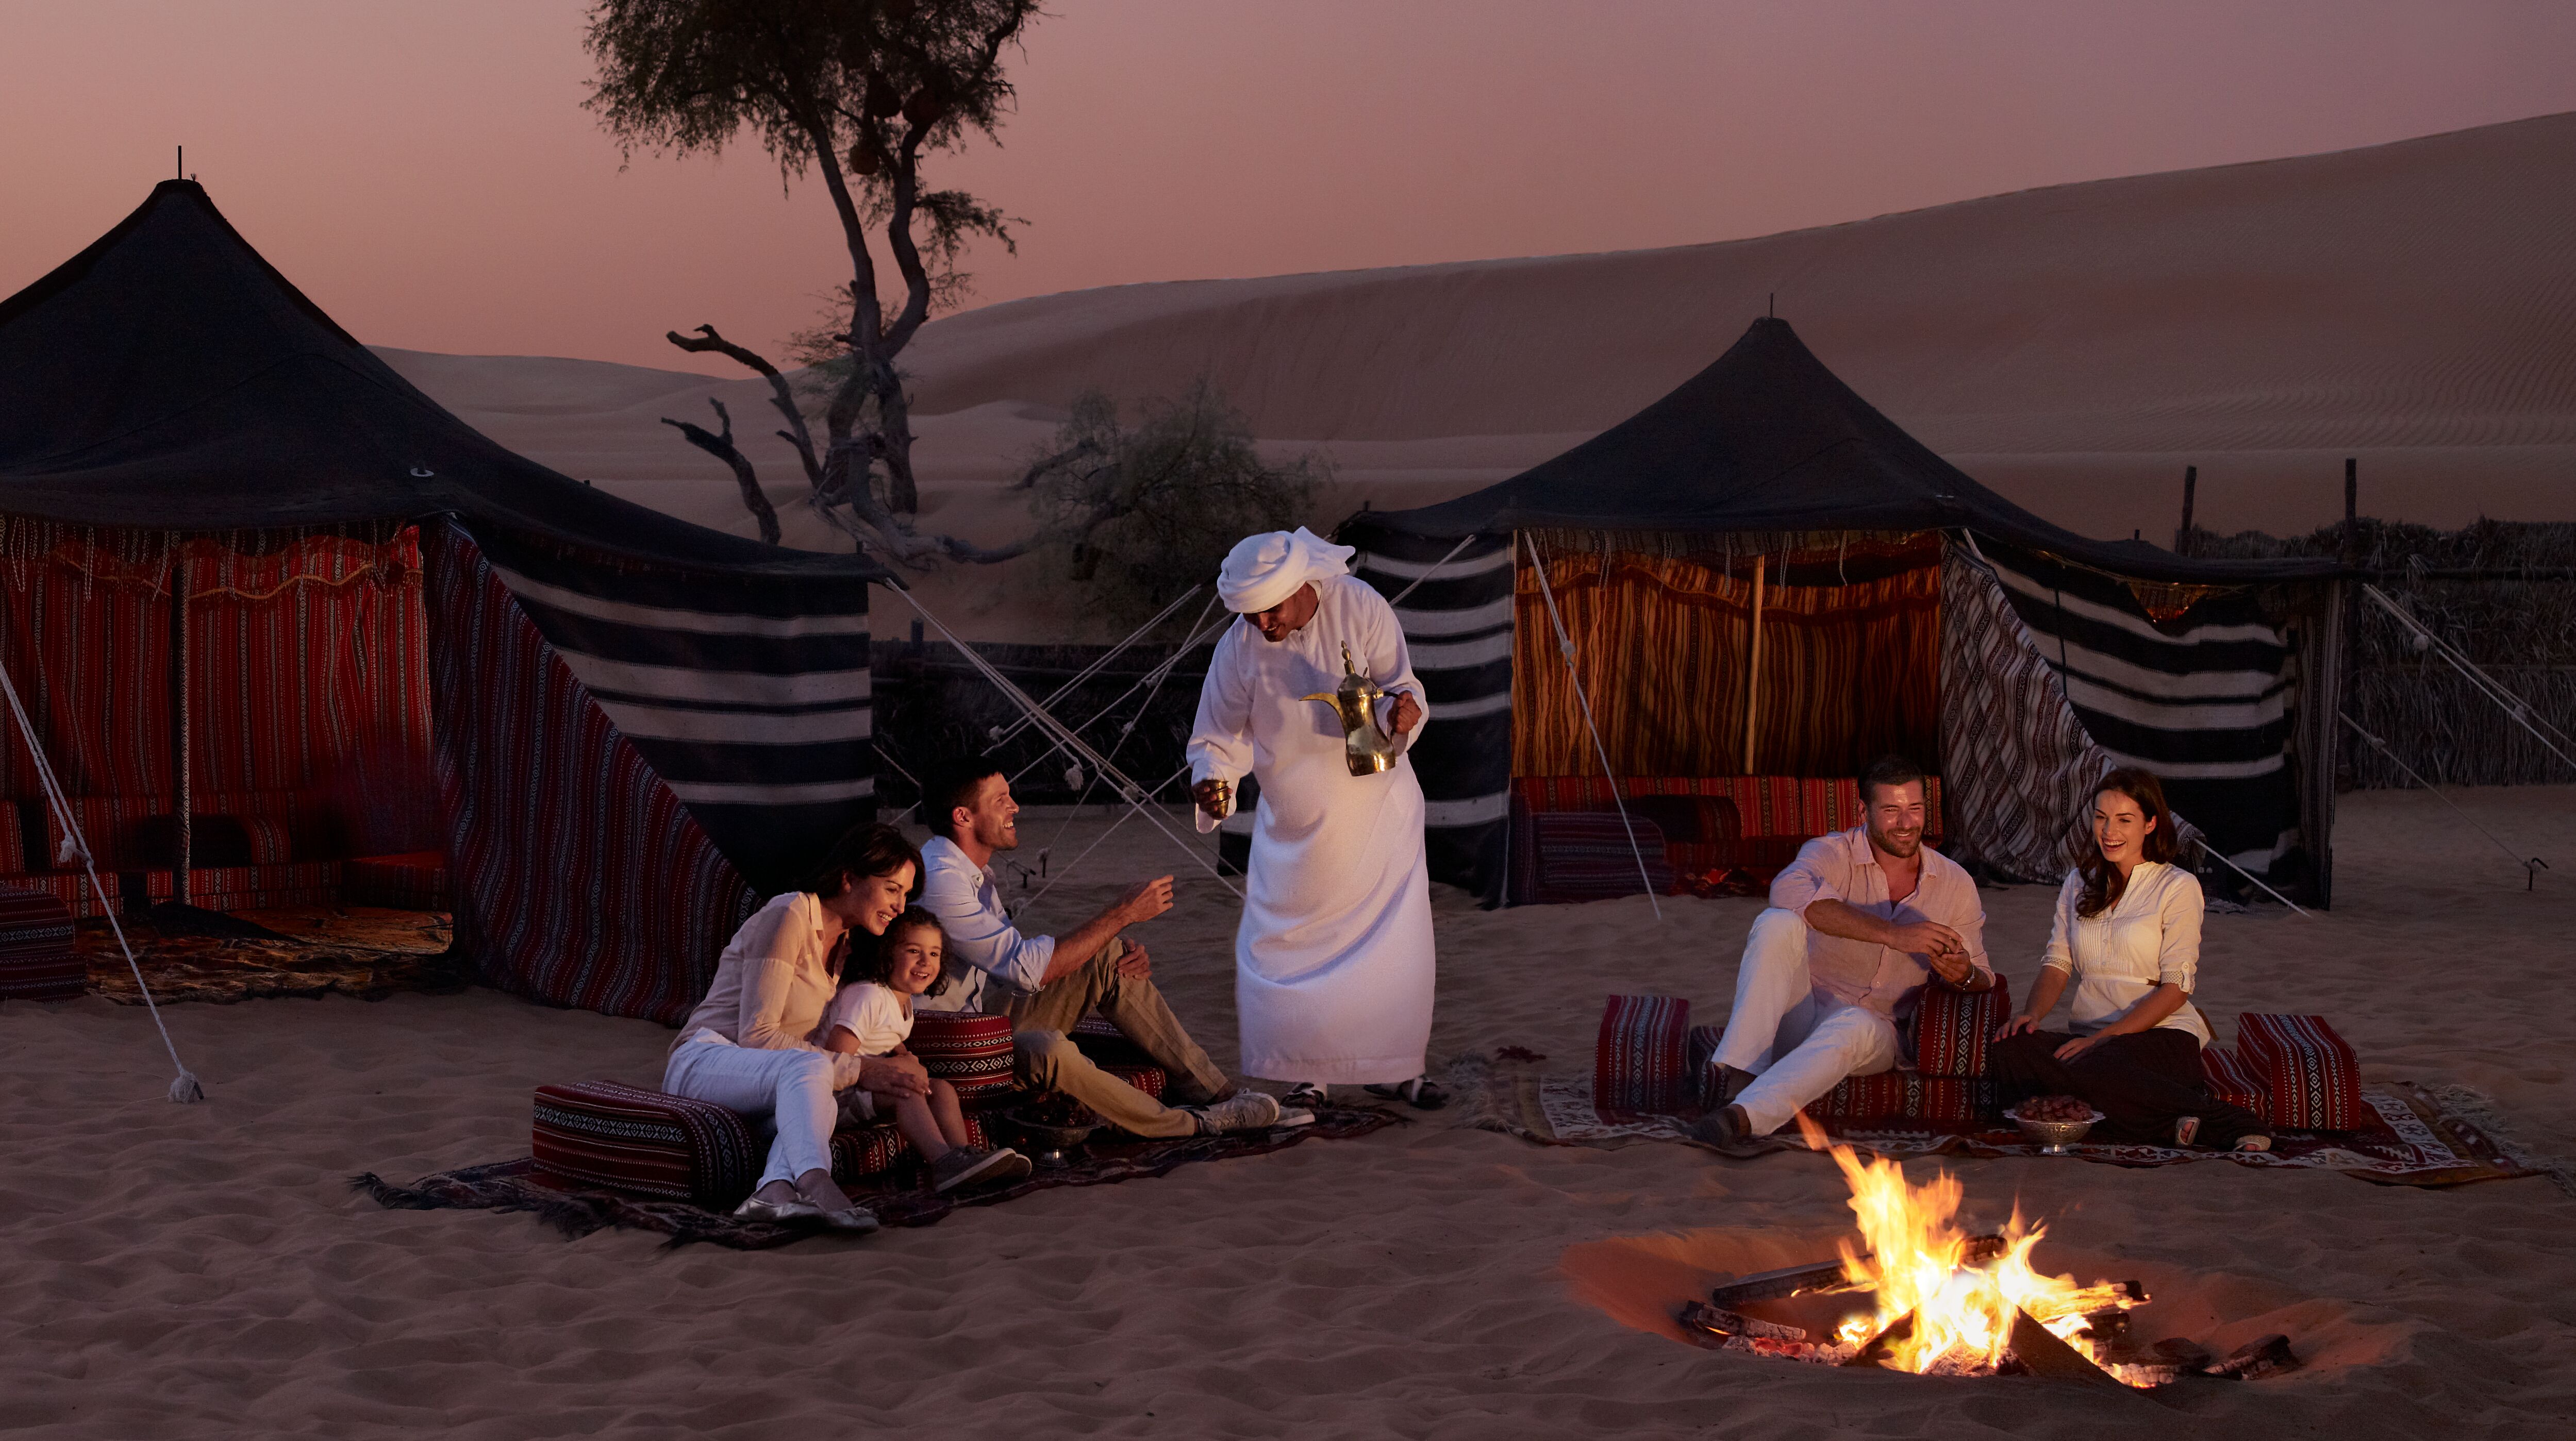 Local guide giving tourists refreshments in the Arabian Nights Vollage in Abu Dhabi